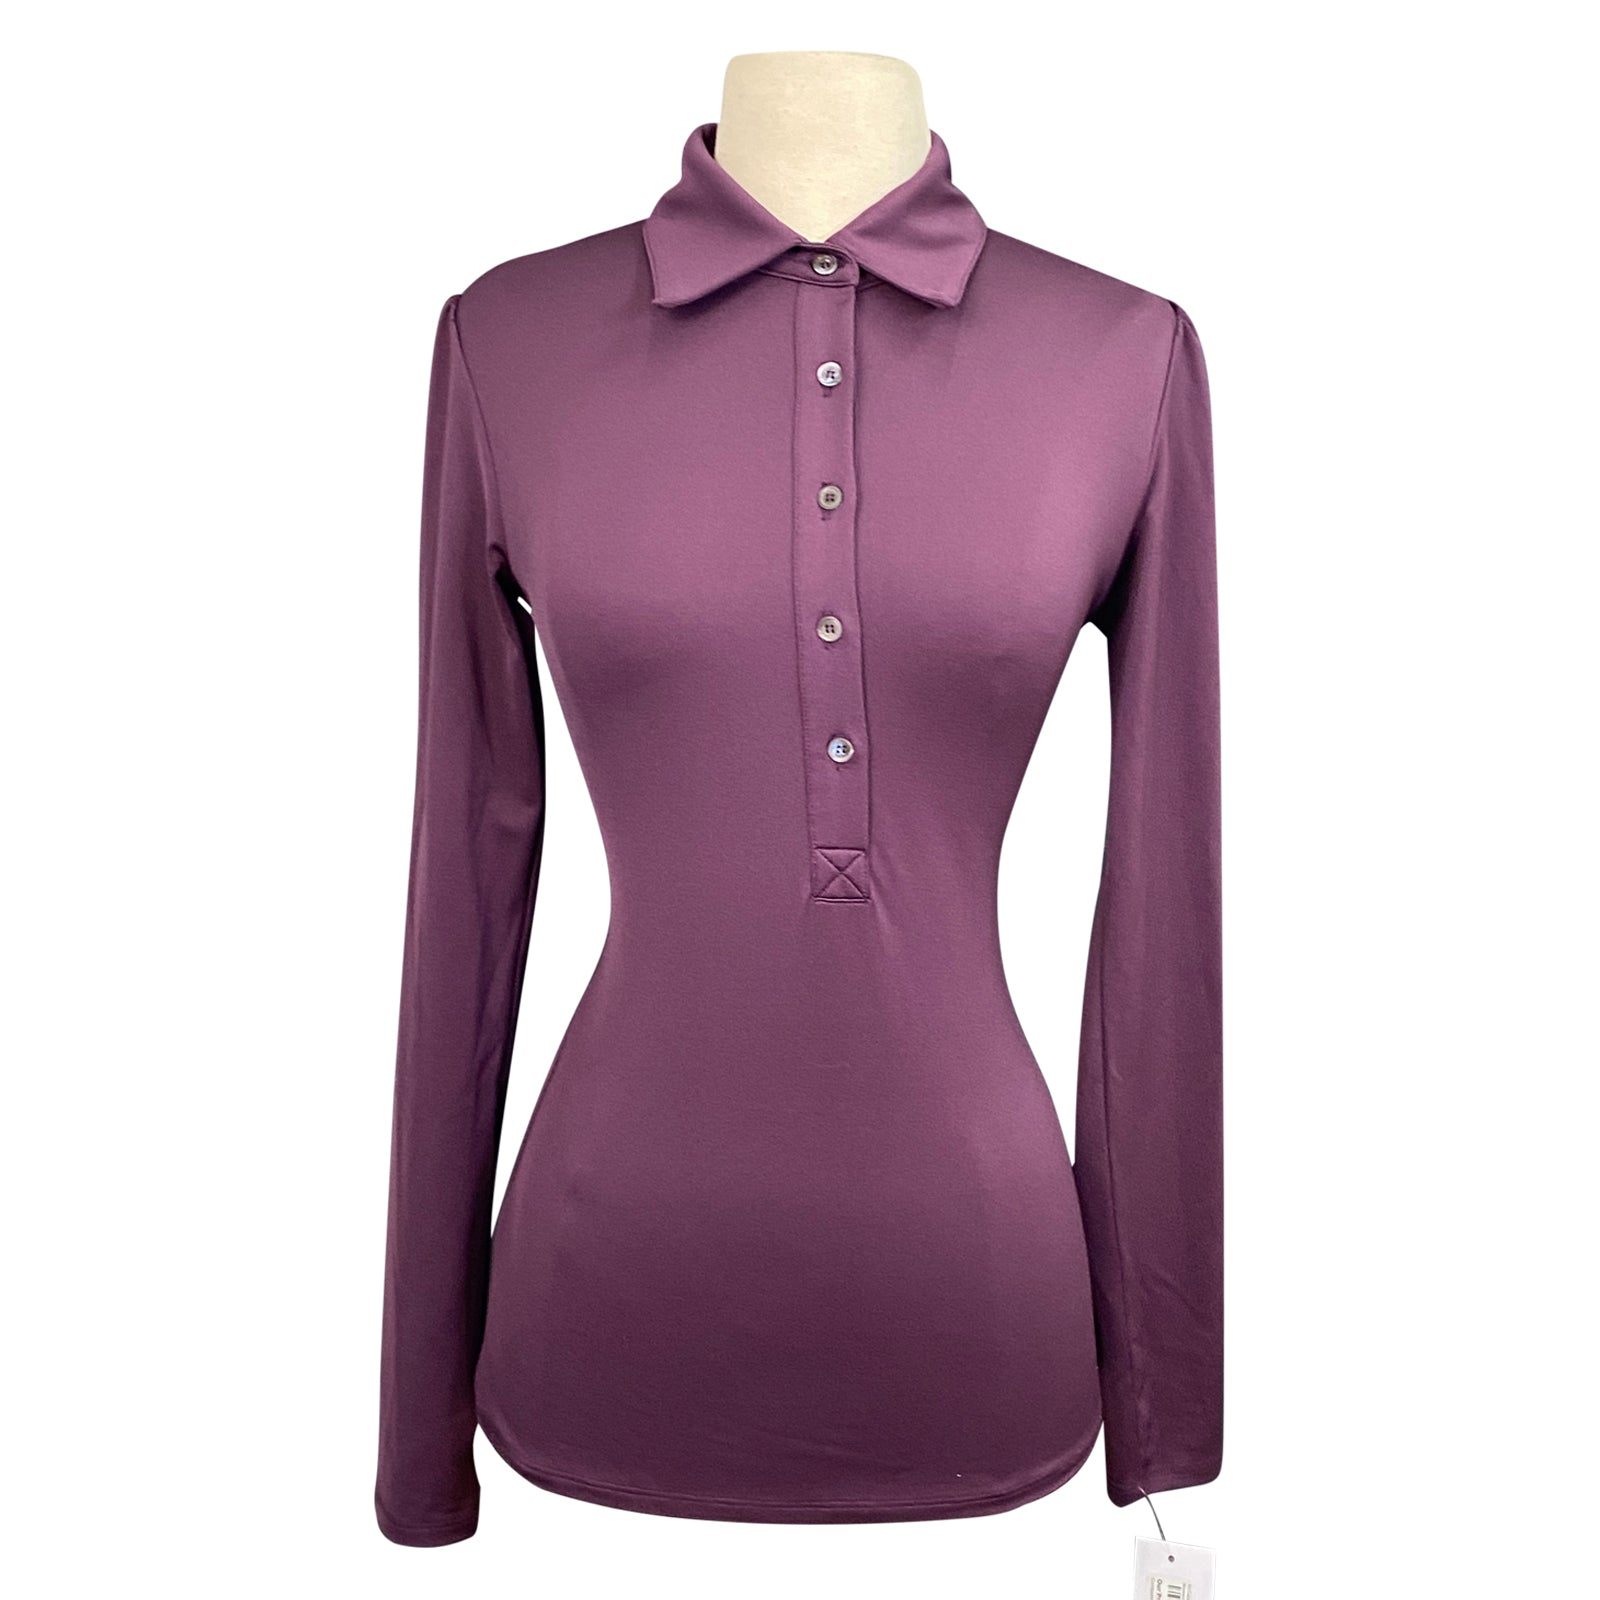 An Capall 'Gracie' Polo in Plum